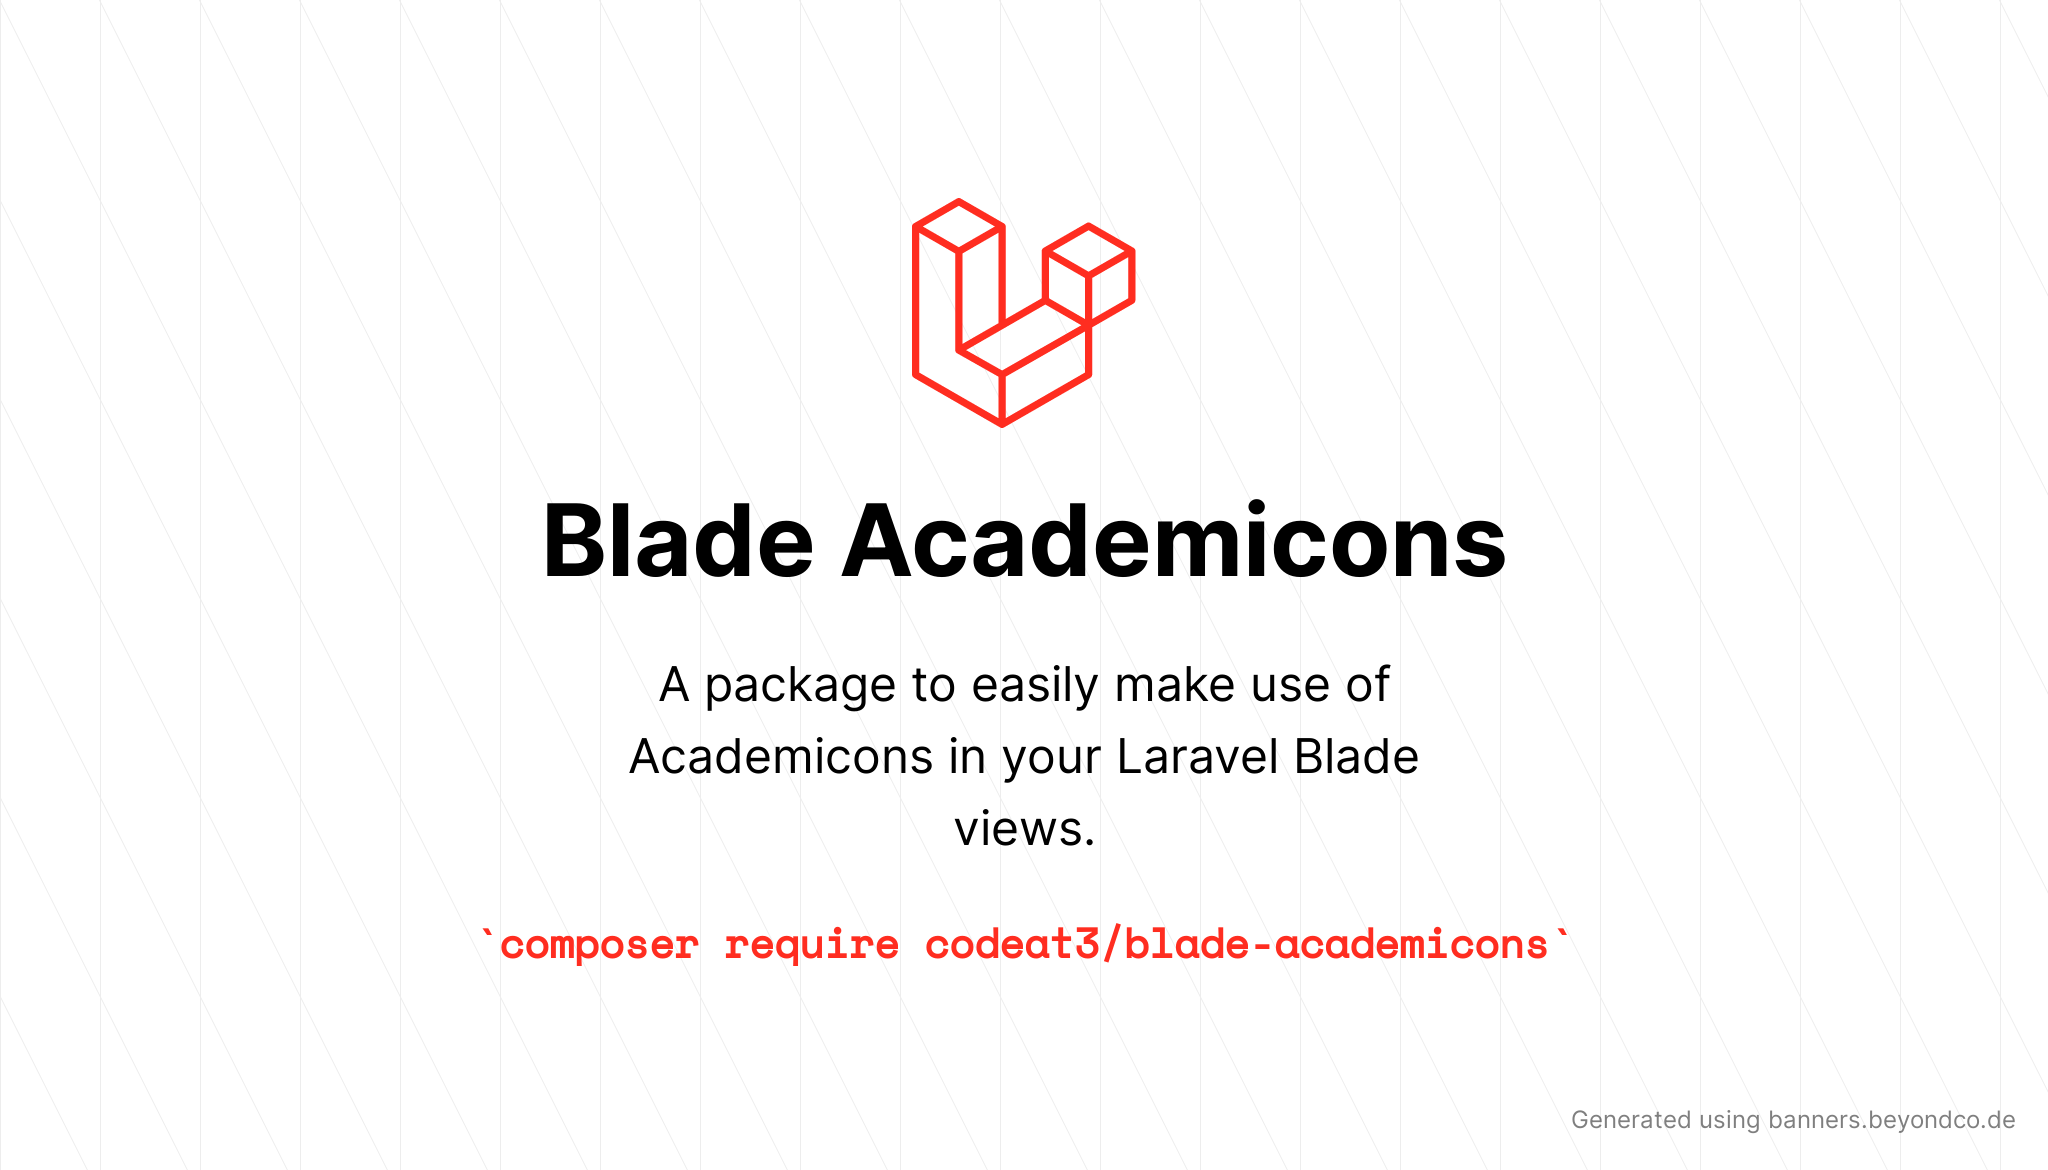 socialcard-blade-academicons.png